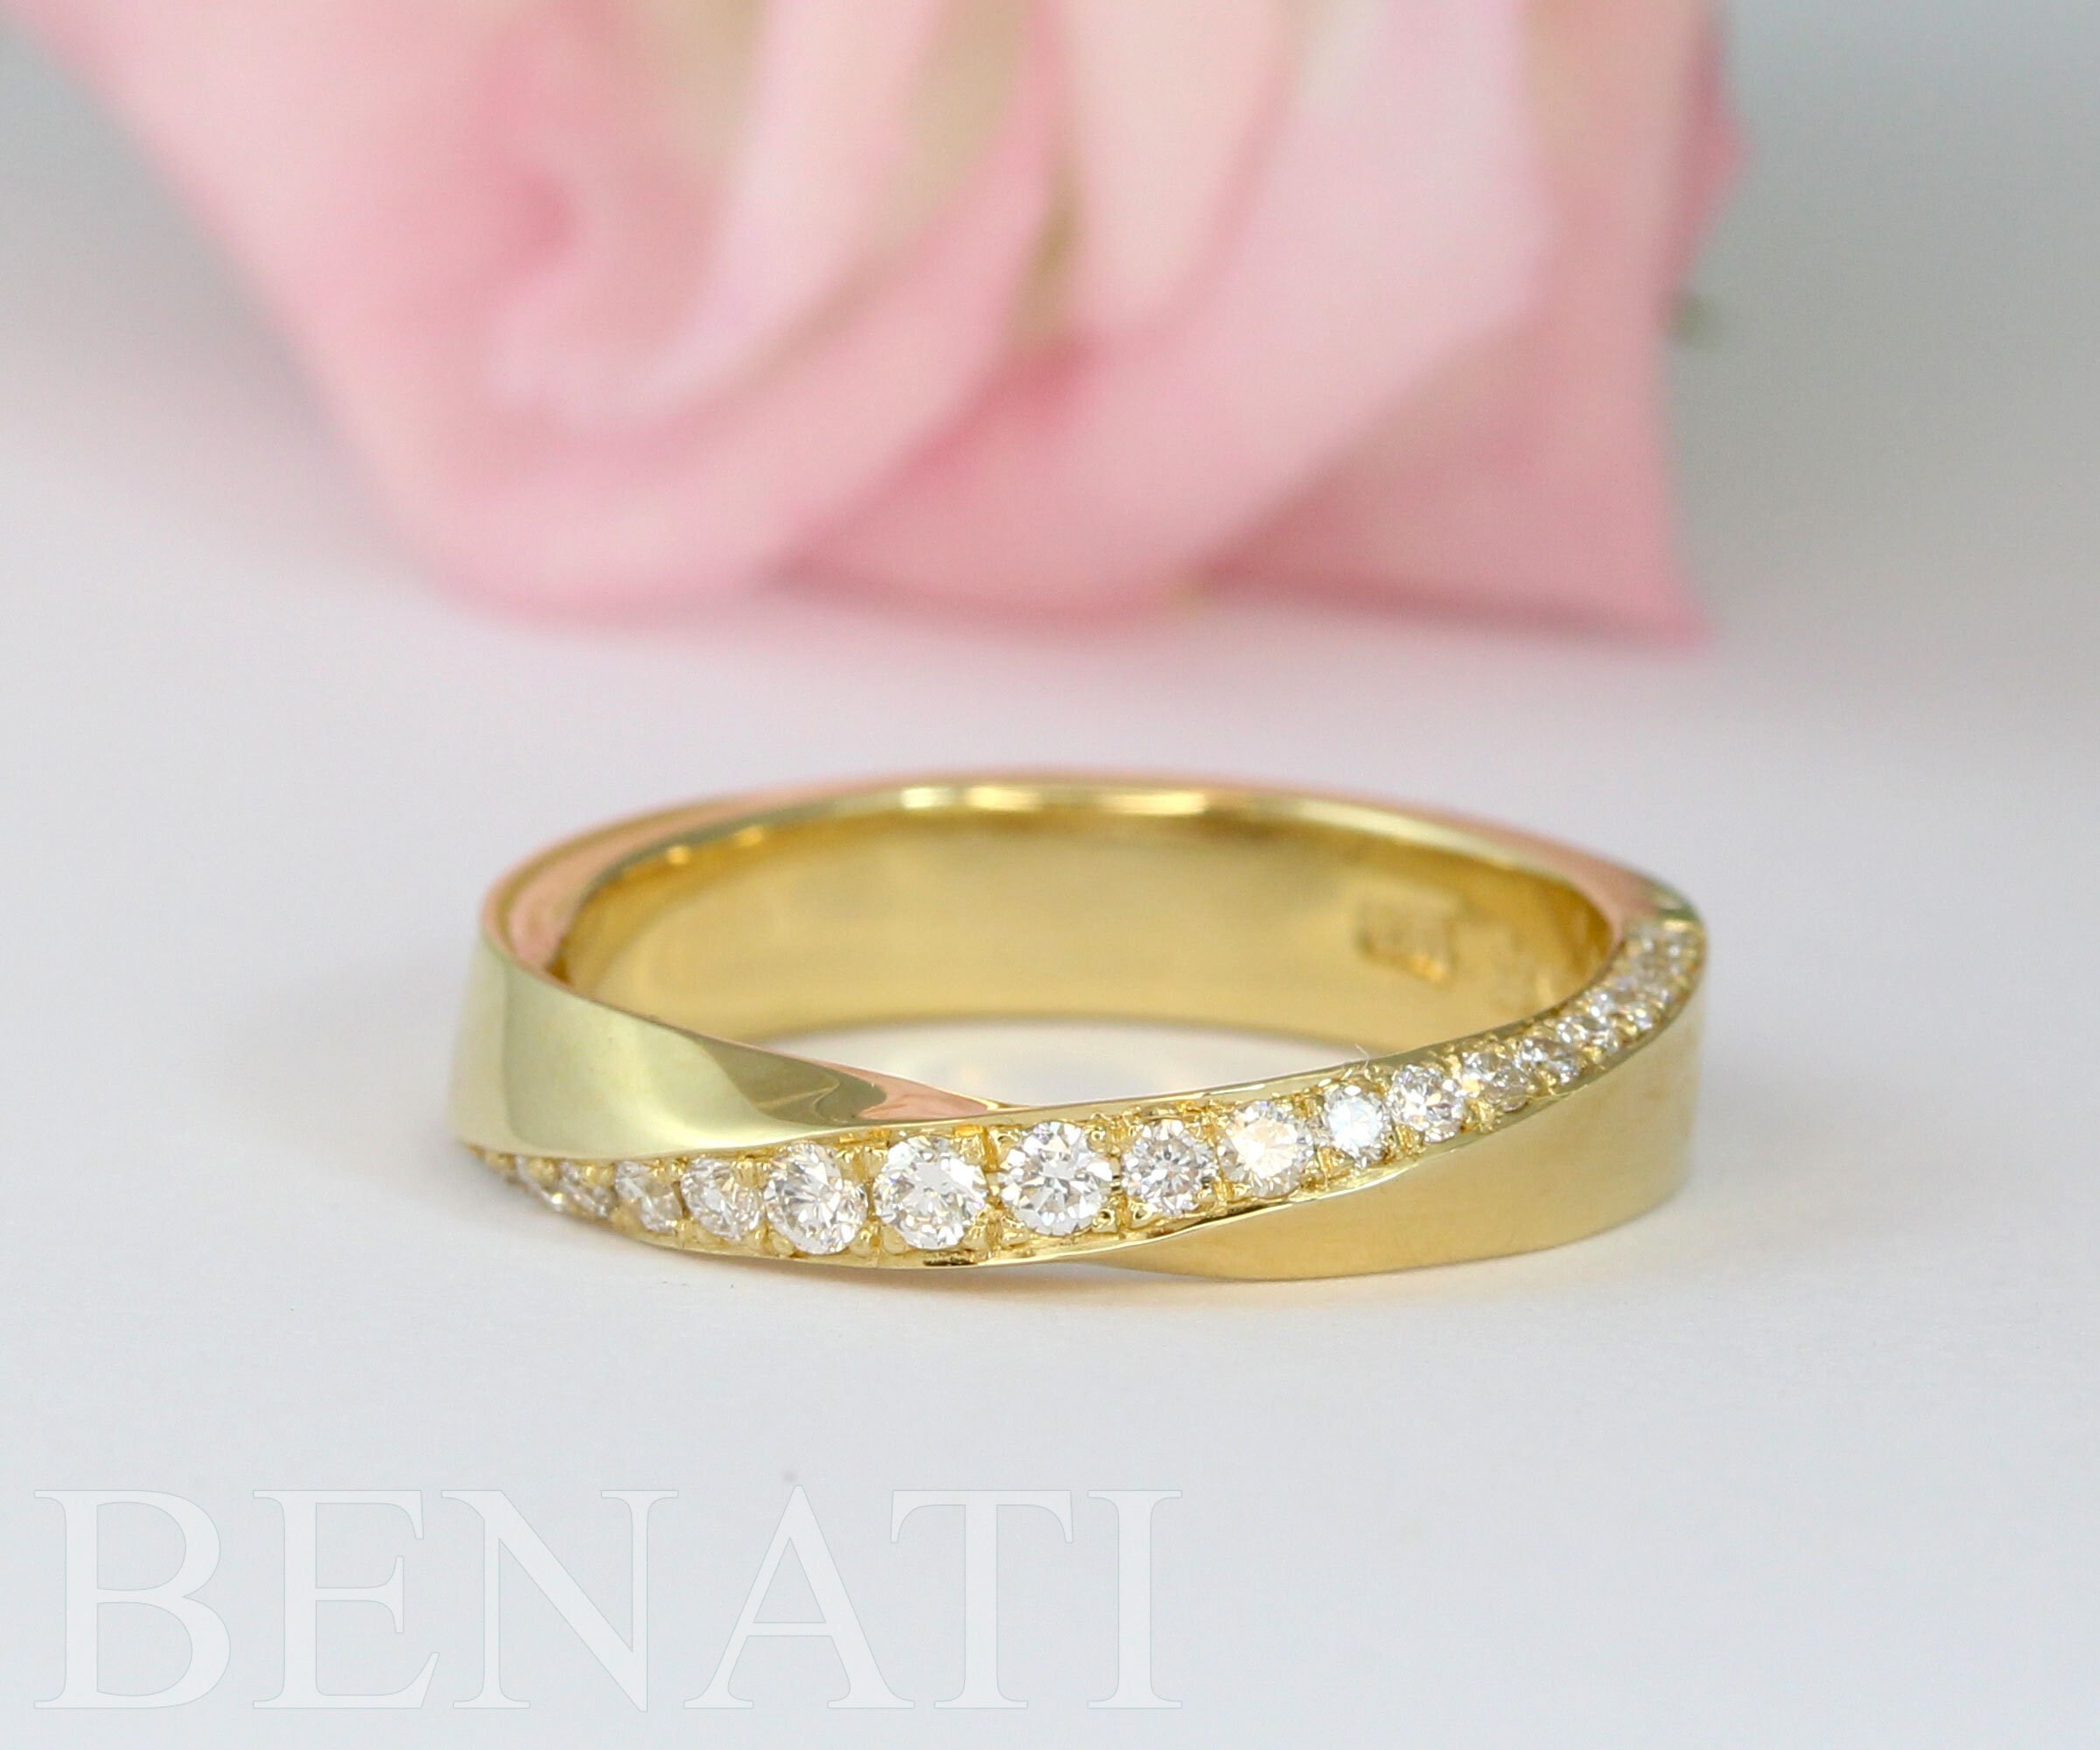 9ct vs. 18ct Gold: What's the difference and does it matter